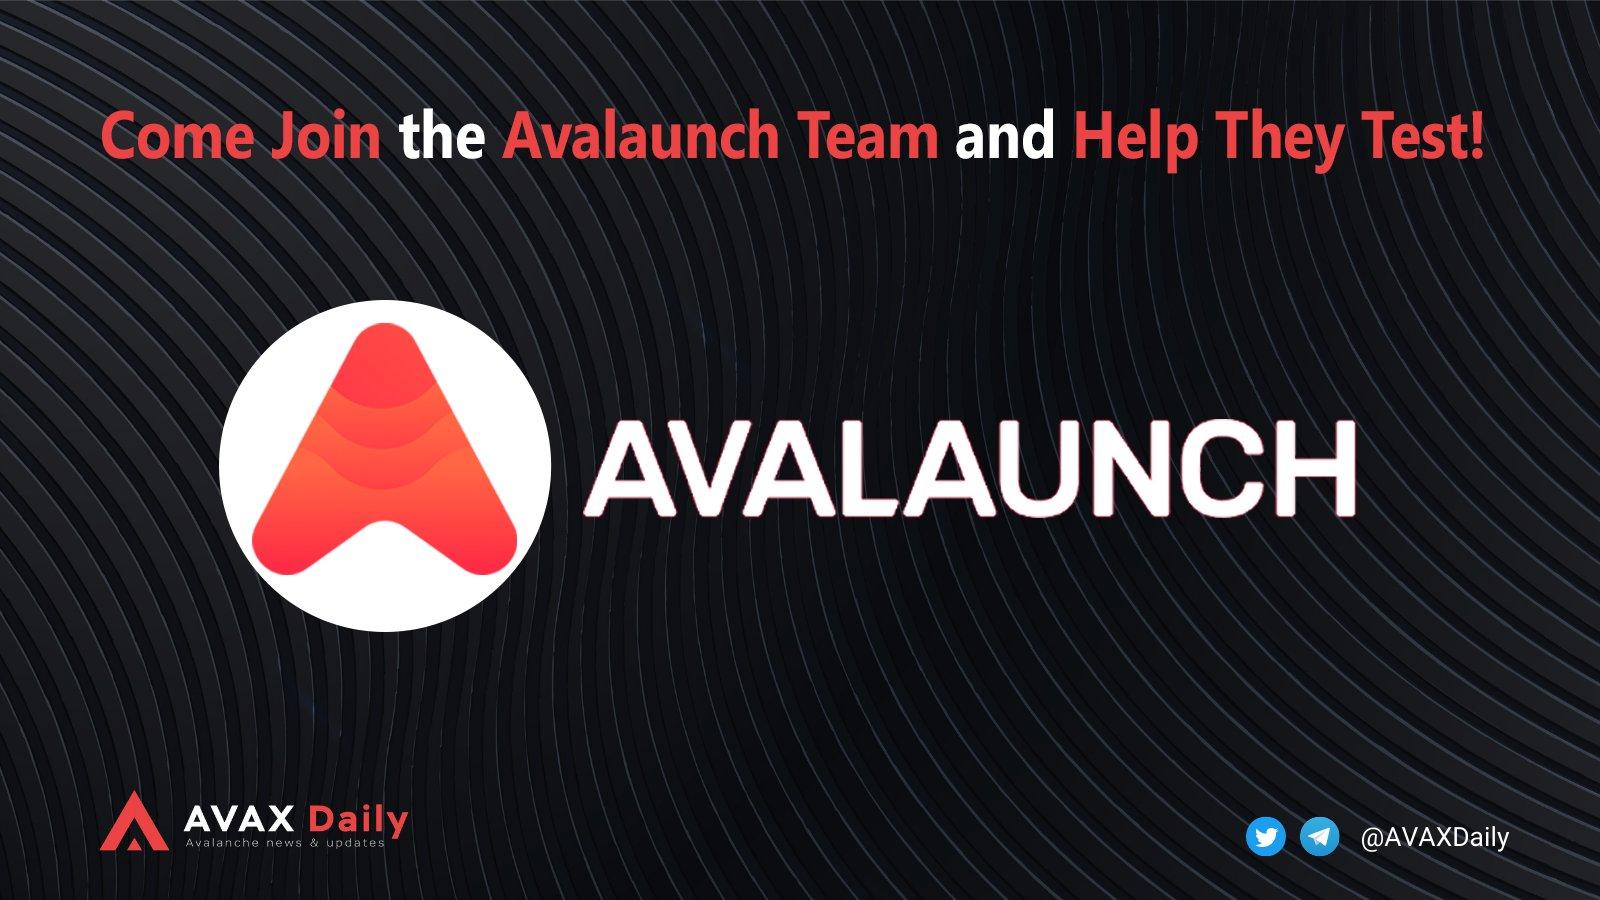 Come Join Avalaunch Team And Help They Test